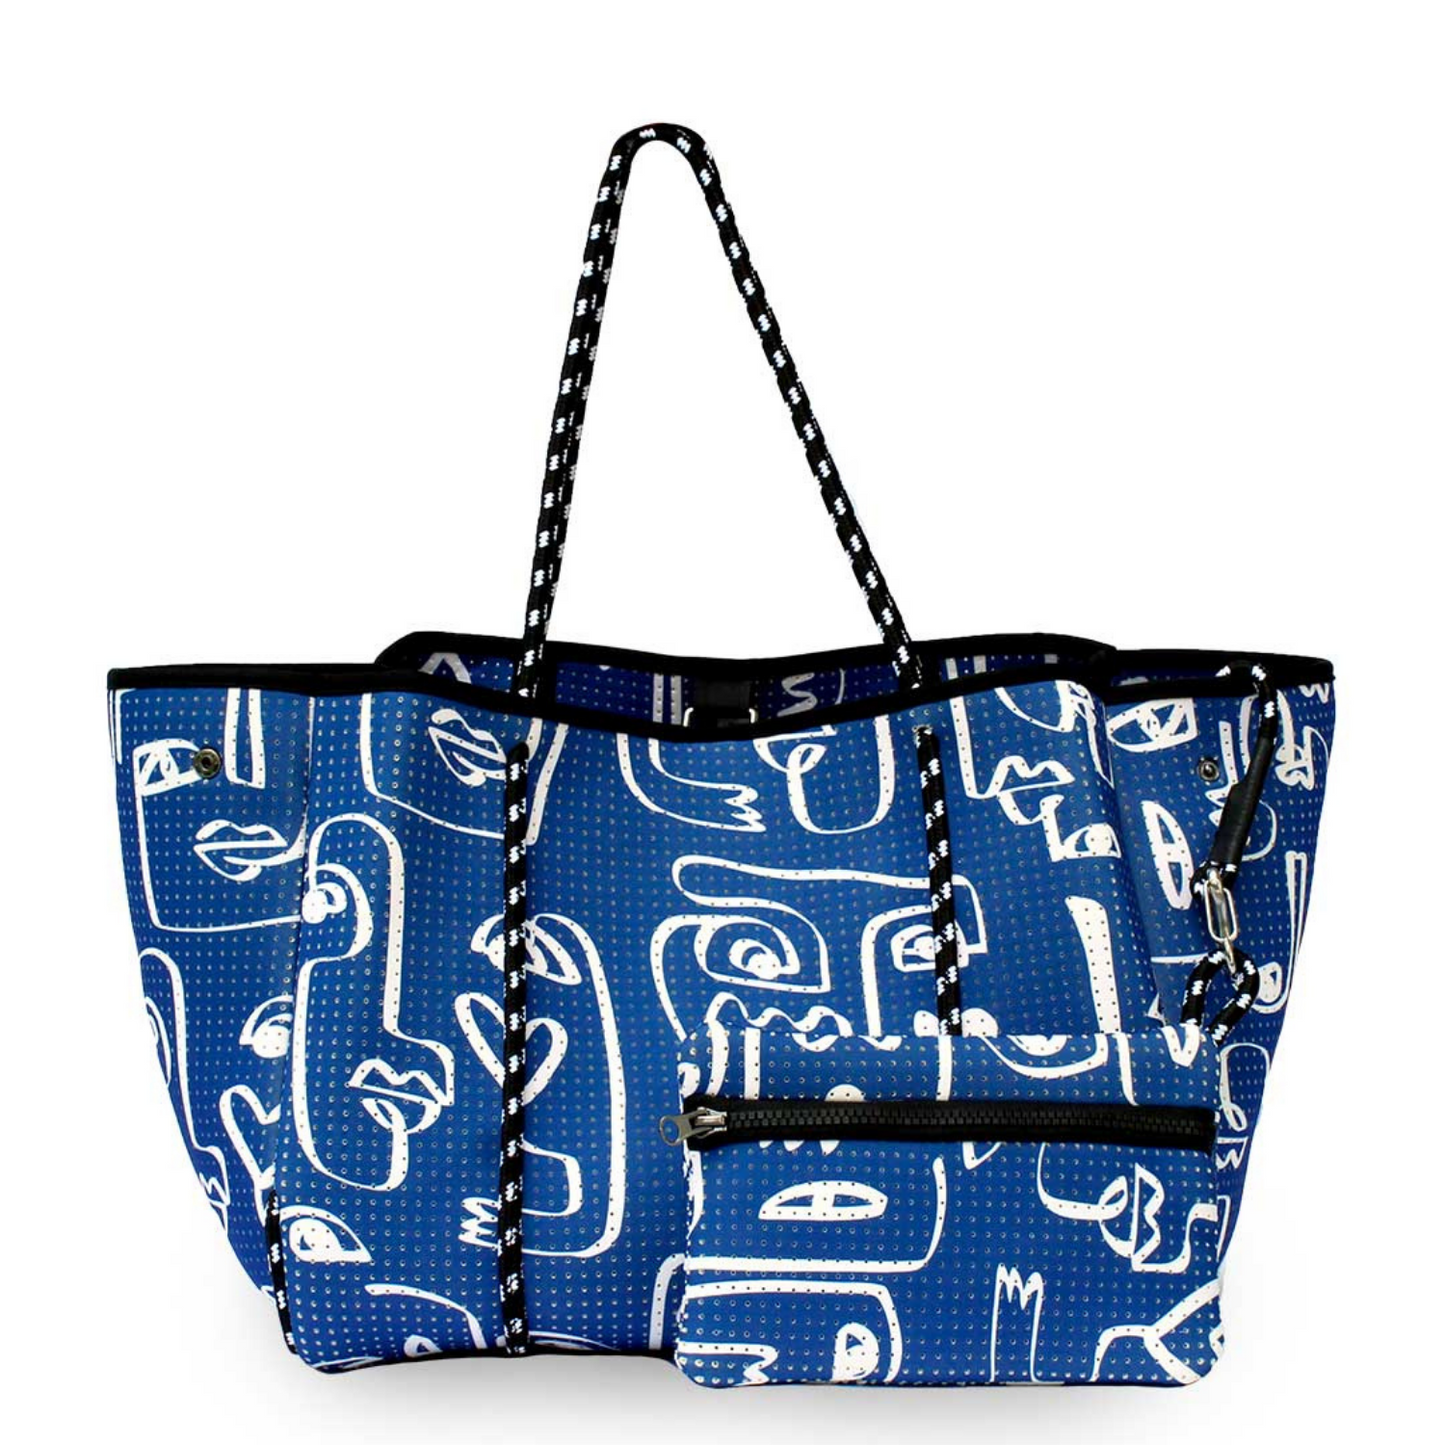 EVERYDAY TOTE I SEE YOU BLUE